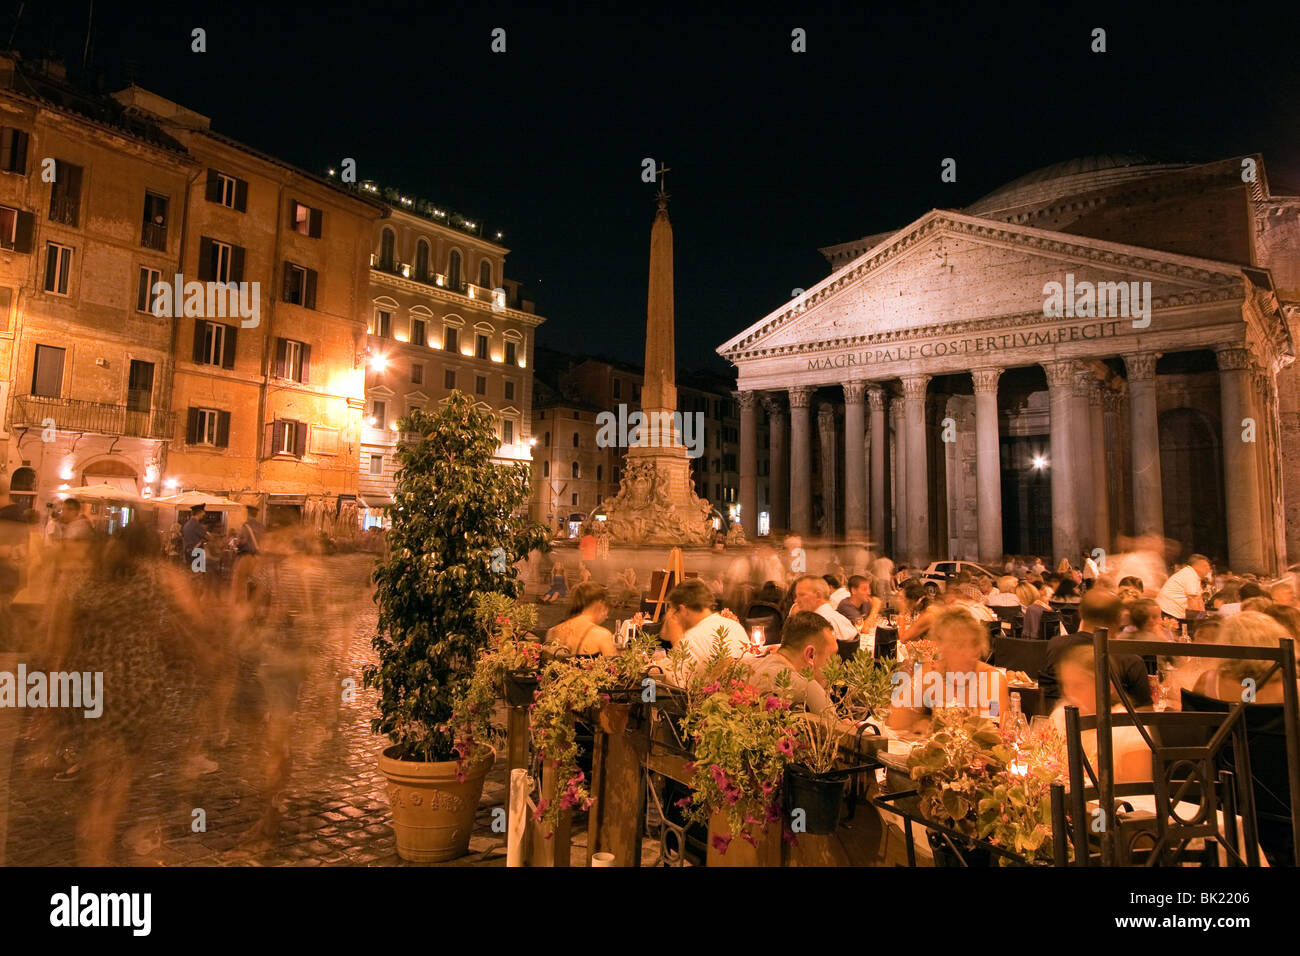 Piazza della Rotonda and Pantheon ad night, with people eating and drinking at restaurants and bars. Rome, Italy Stock Photo